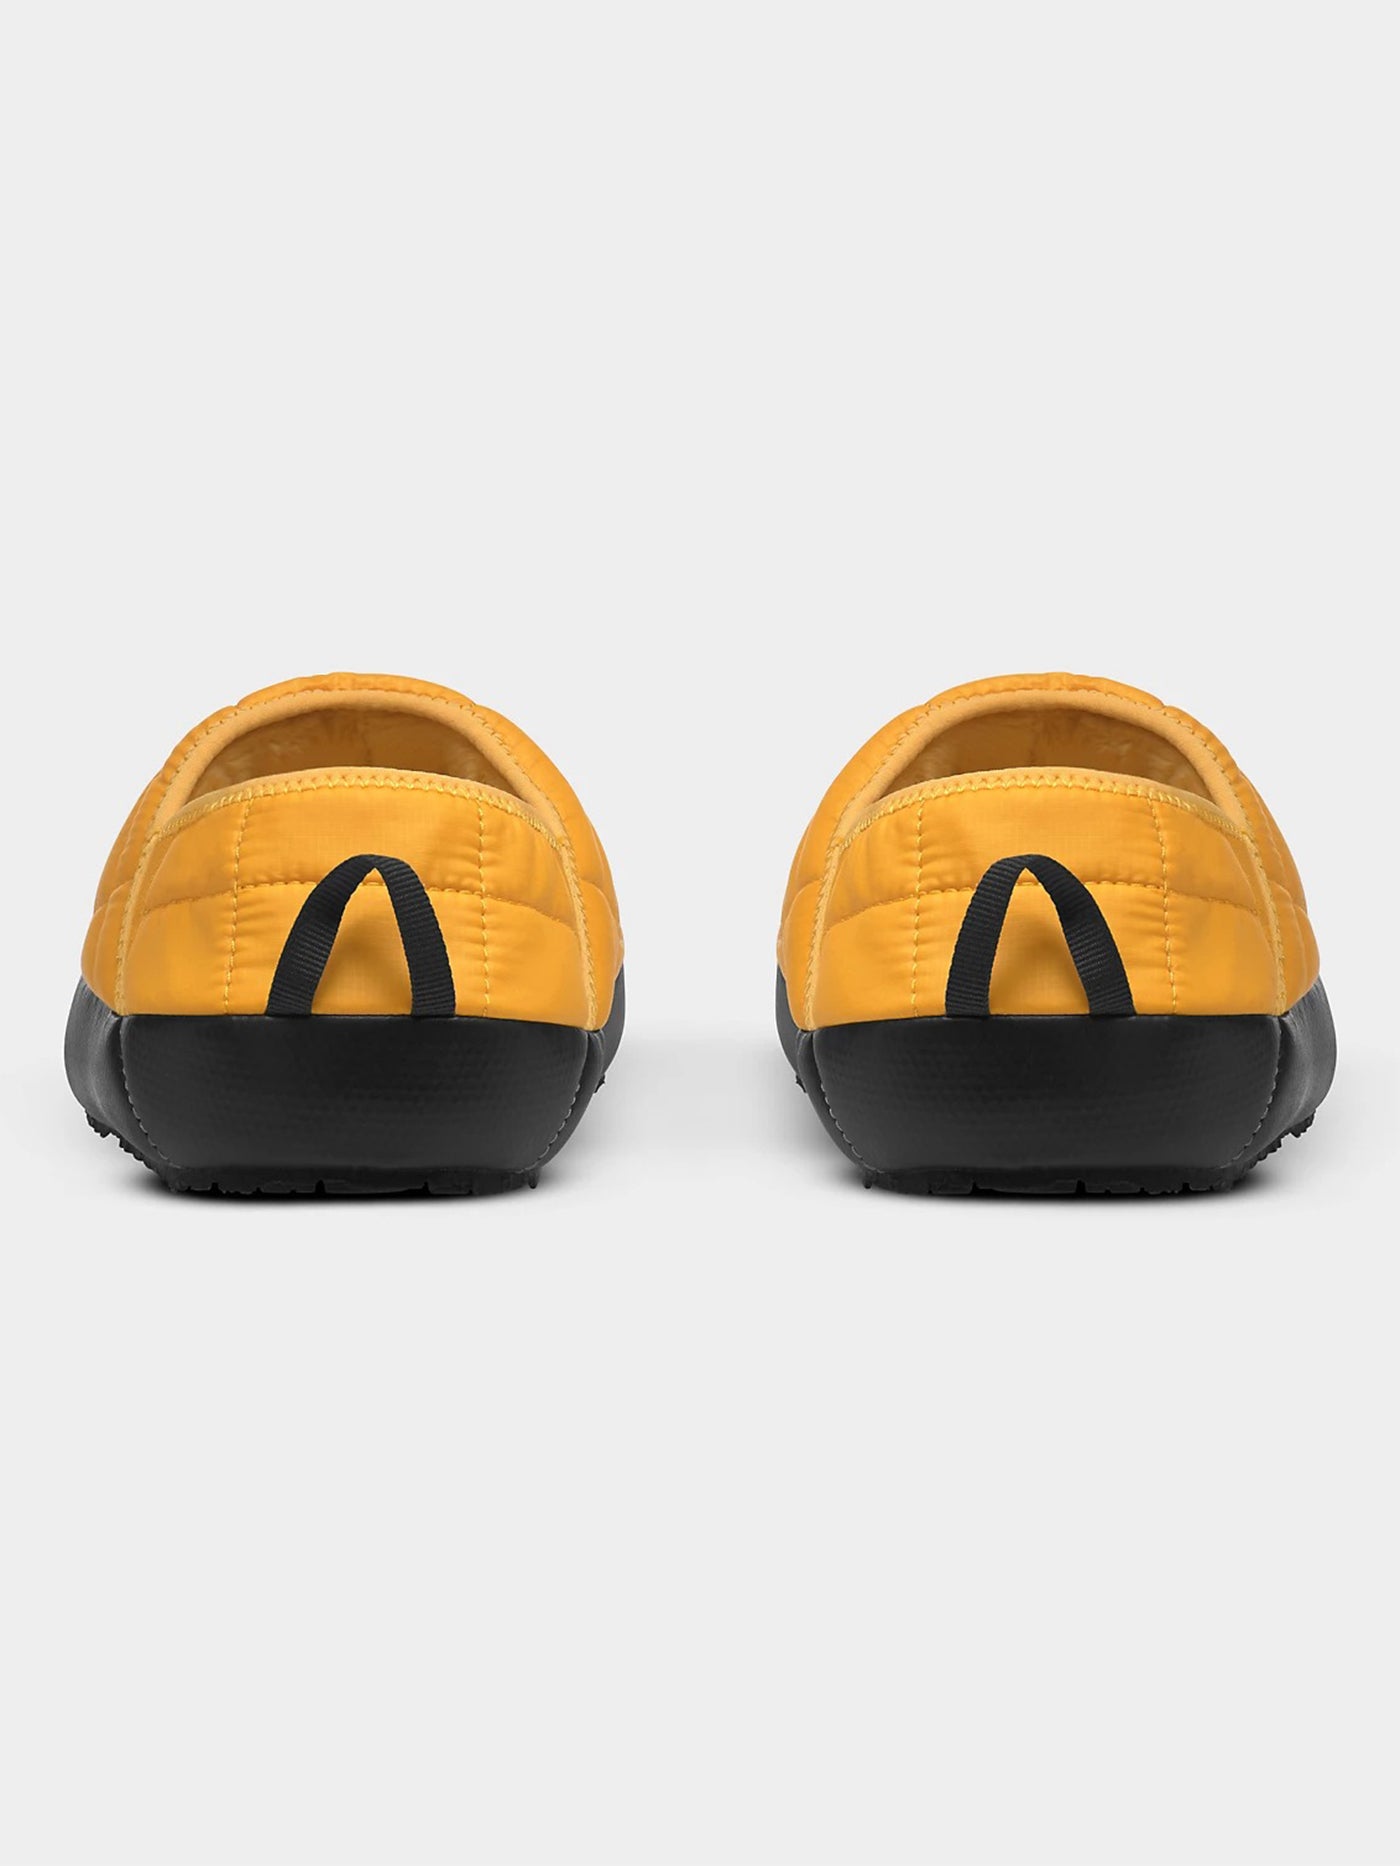 The North Face Thermoball Traction Mule V Gold/Black Shoes